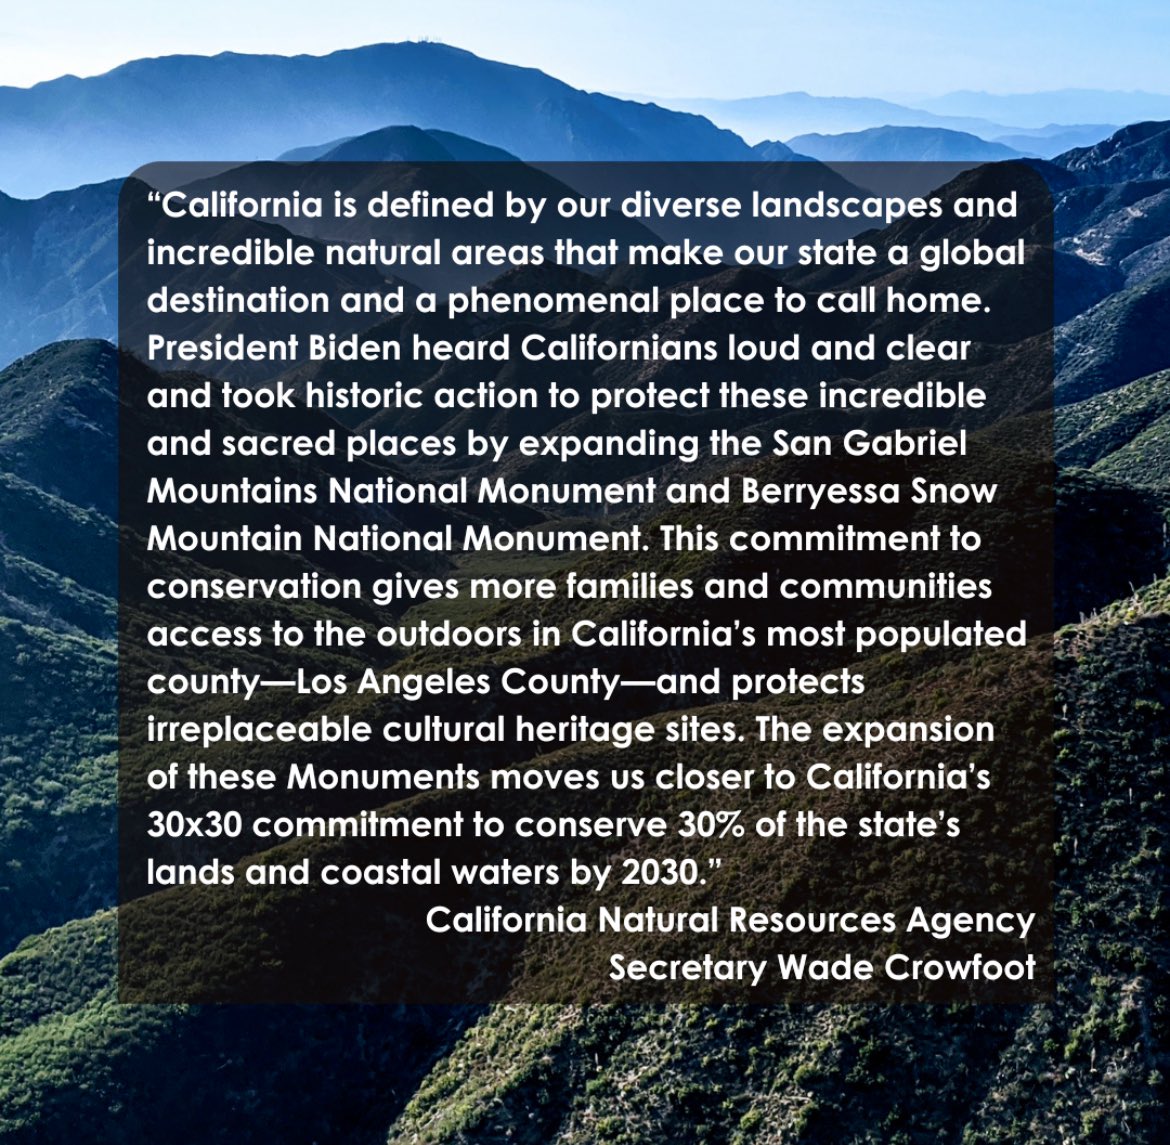 📢BIG CONSERVATION NEWS ALERT @POTUS expanded Berryessa Snow Mtn & San Gabriel Mtns Ntl Monuments today! 🏔️ A huge thx to @POTUS, @SenAlexPadilla, @Senlaphonza, @RepGaramendi, @RepThompson, @CAgovernor, @30x30CA & many others for your leadership! MORE ➡️content.govdelivery.com/accounts/CNRA/…